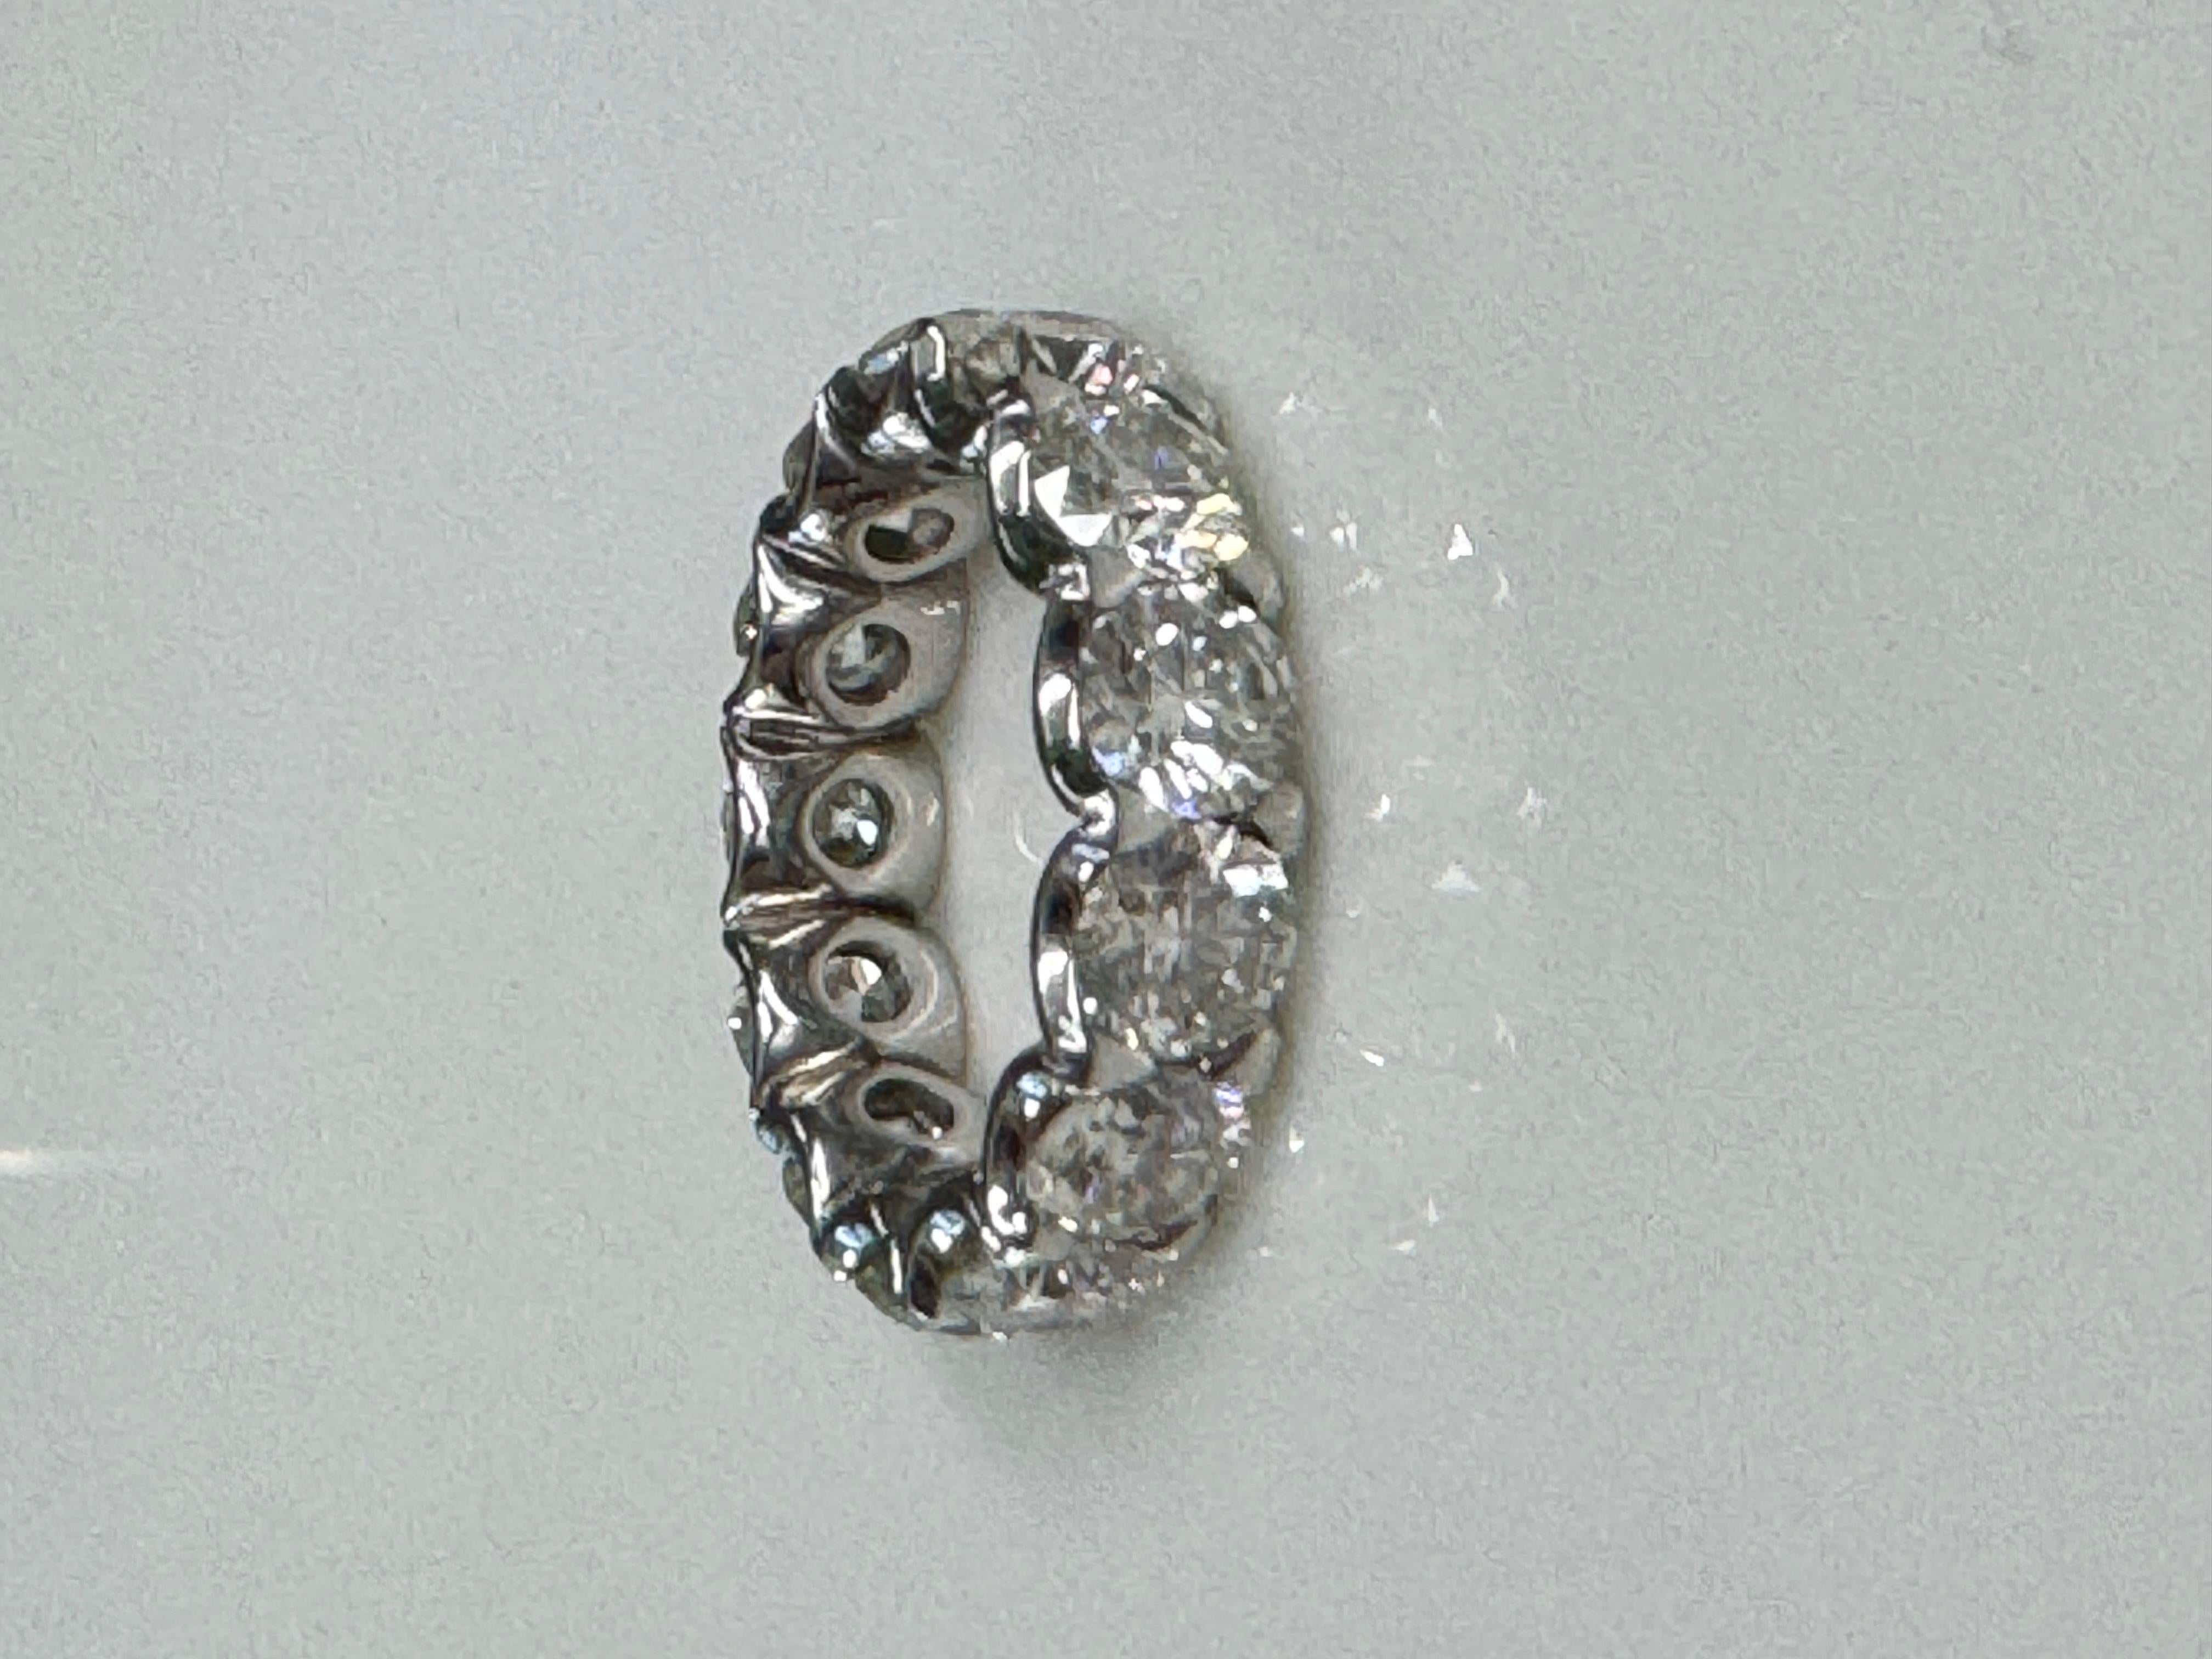 VERVE DIAMONDS specialized in high performance, ideal to super ideal cut diamonds. 7.79 ctw Diamond Platinum Eternity Band. The finishing and polishing on this ring is unbelievable; extreme detail with high Polish everywhere including under the